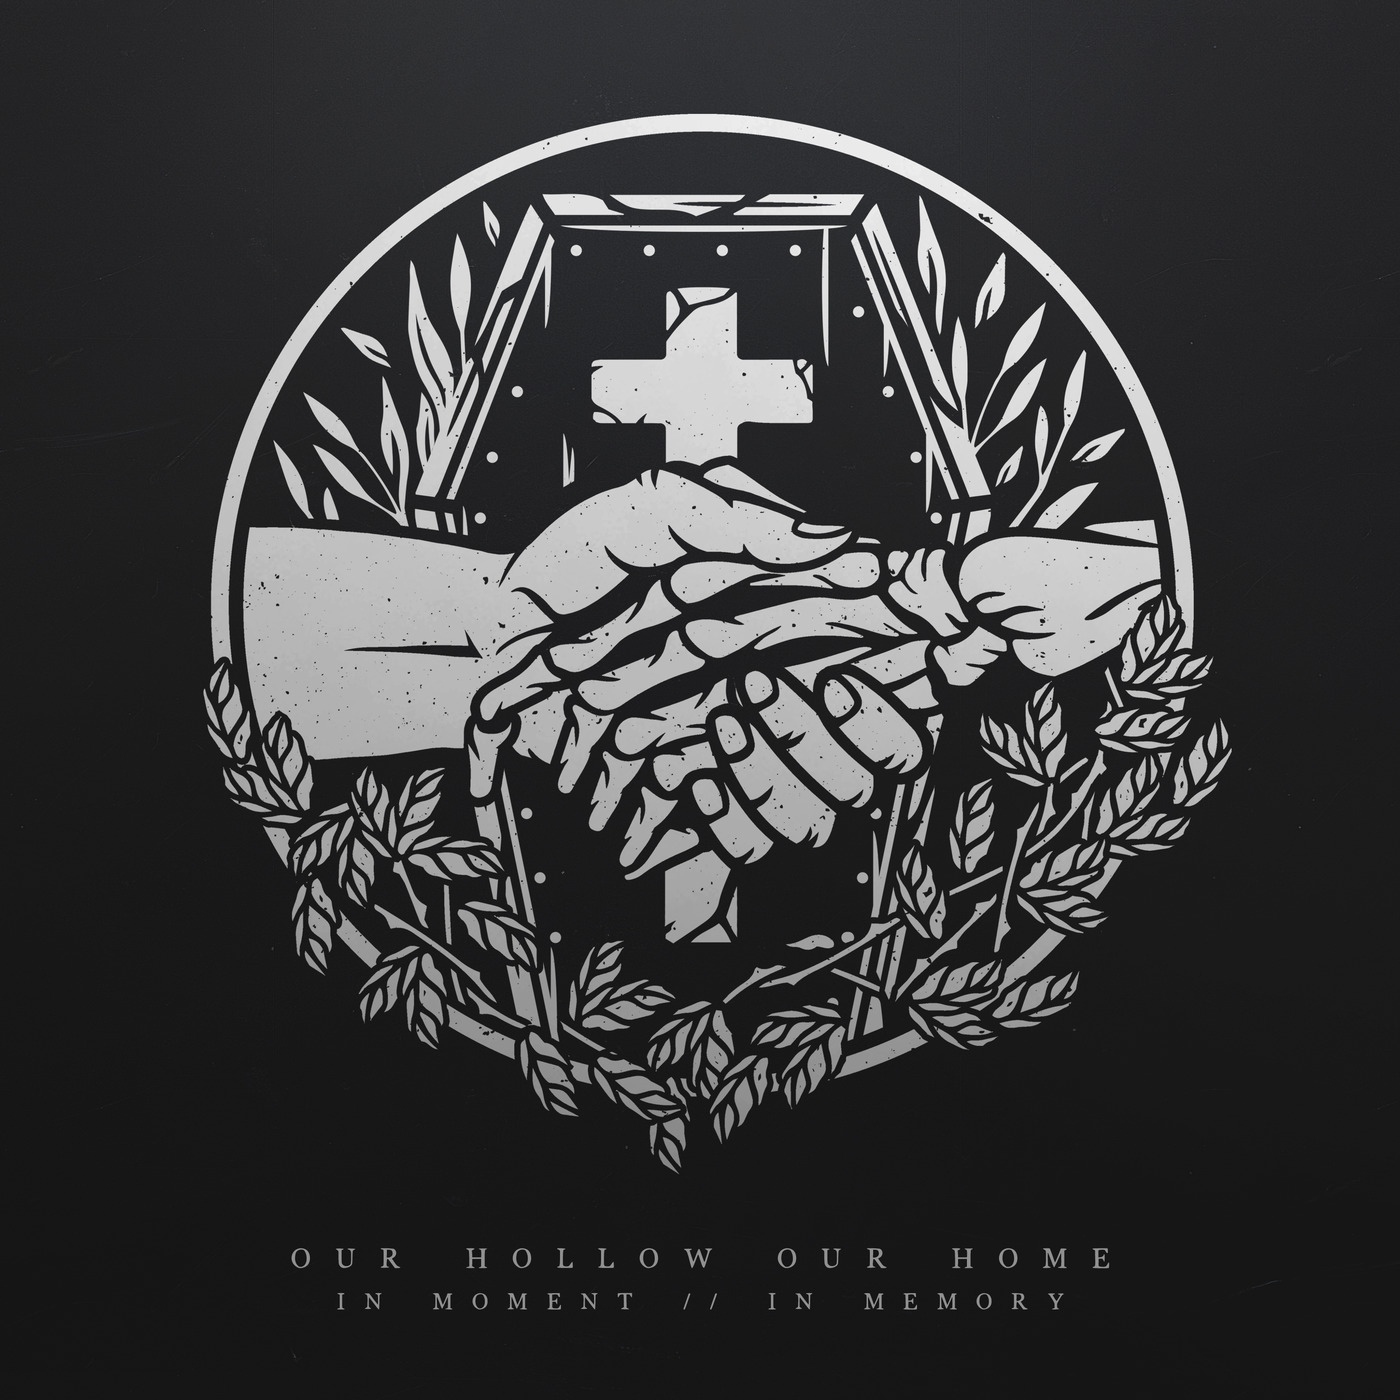 Our Hollow, Our Home - In Moment / / In Memory (2018) Album Info